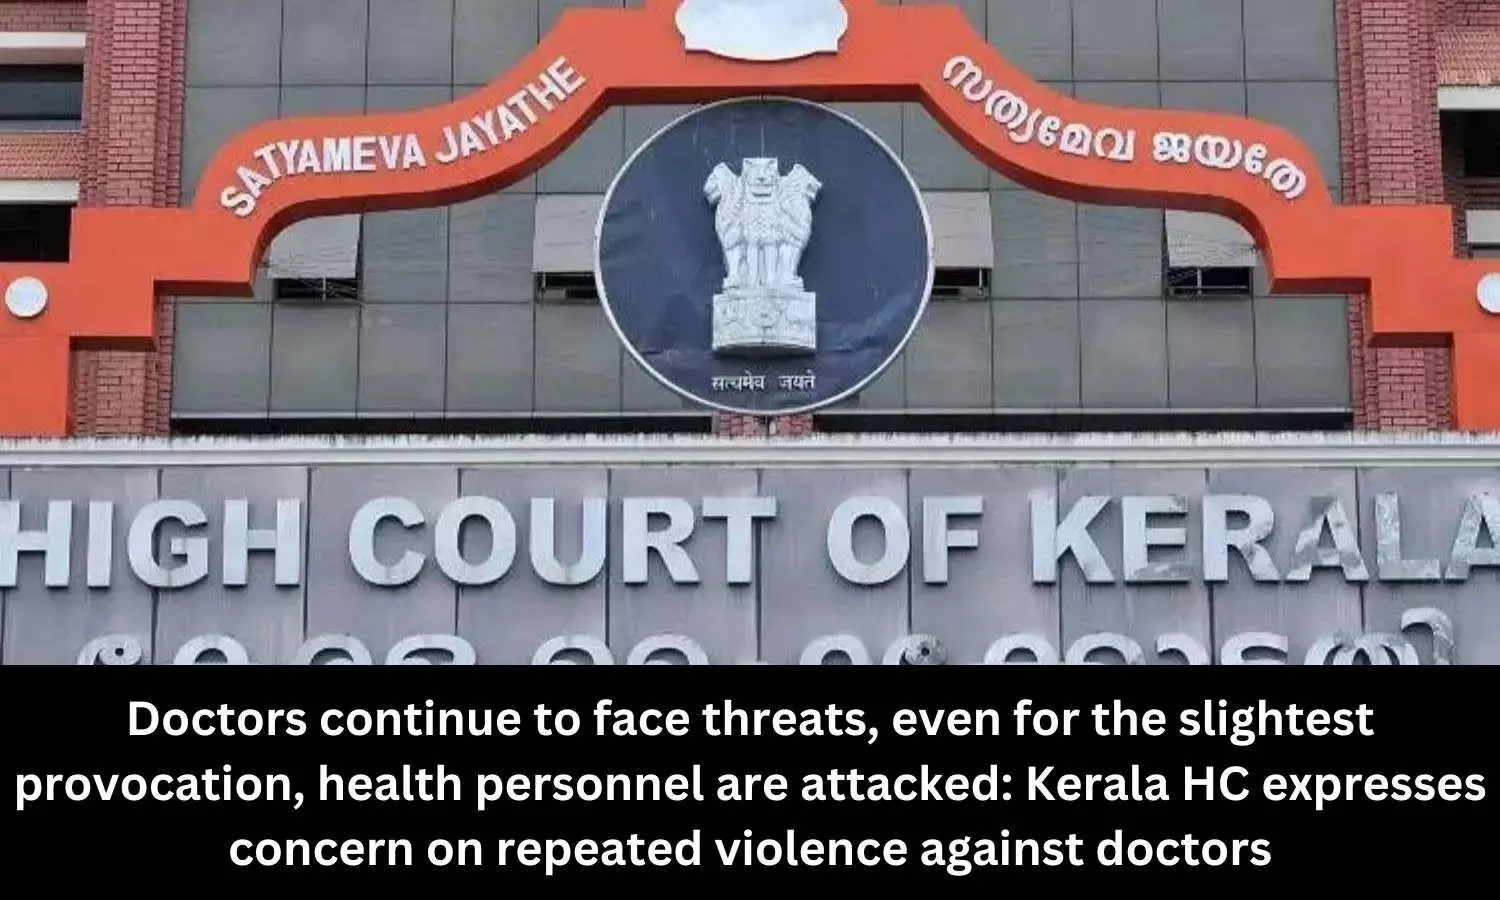 Doctors continue to face threats, even for the slightest provocation, health personnel are attacked: Kerala HC expresses concern on repeated violence against doctors